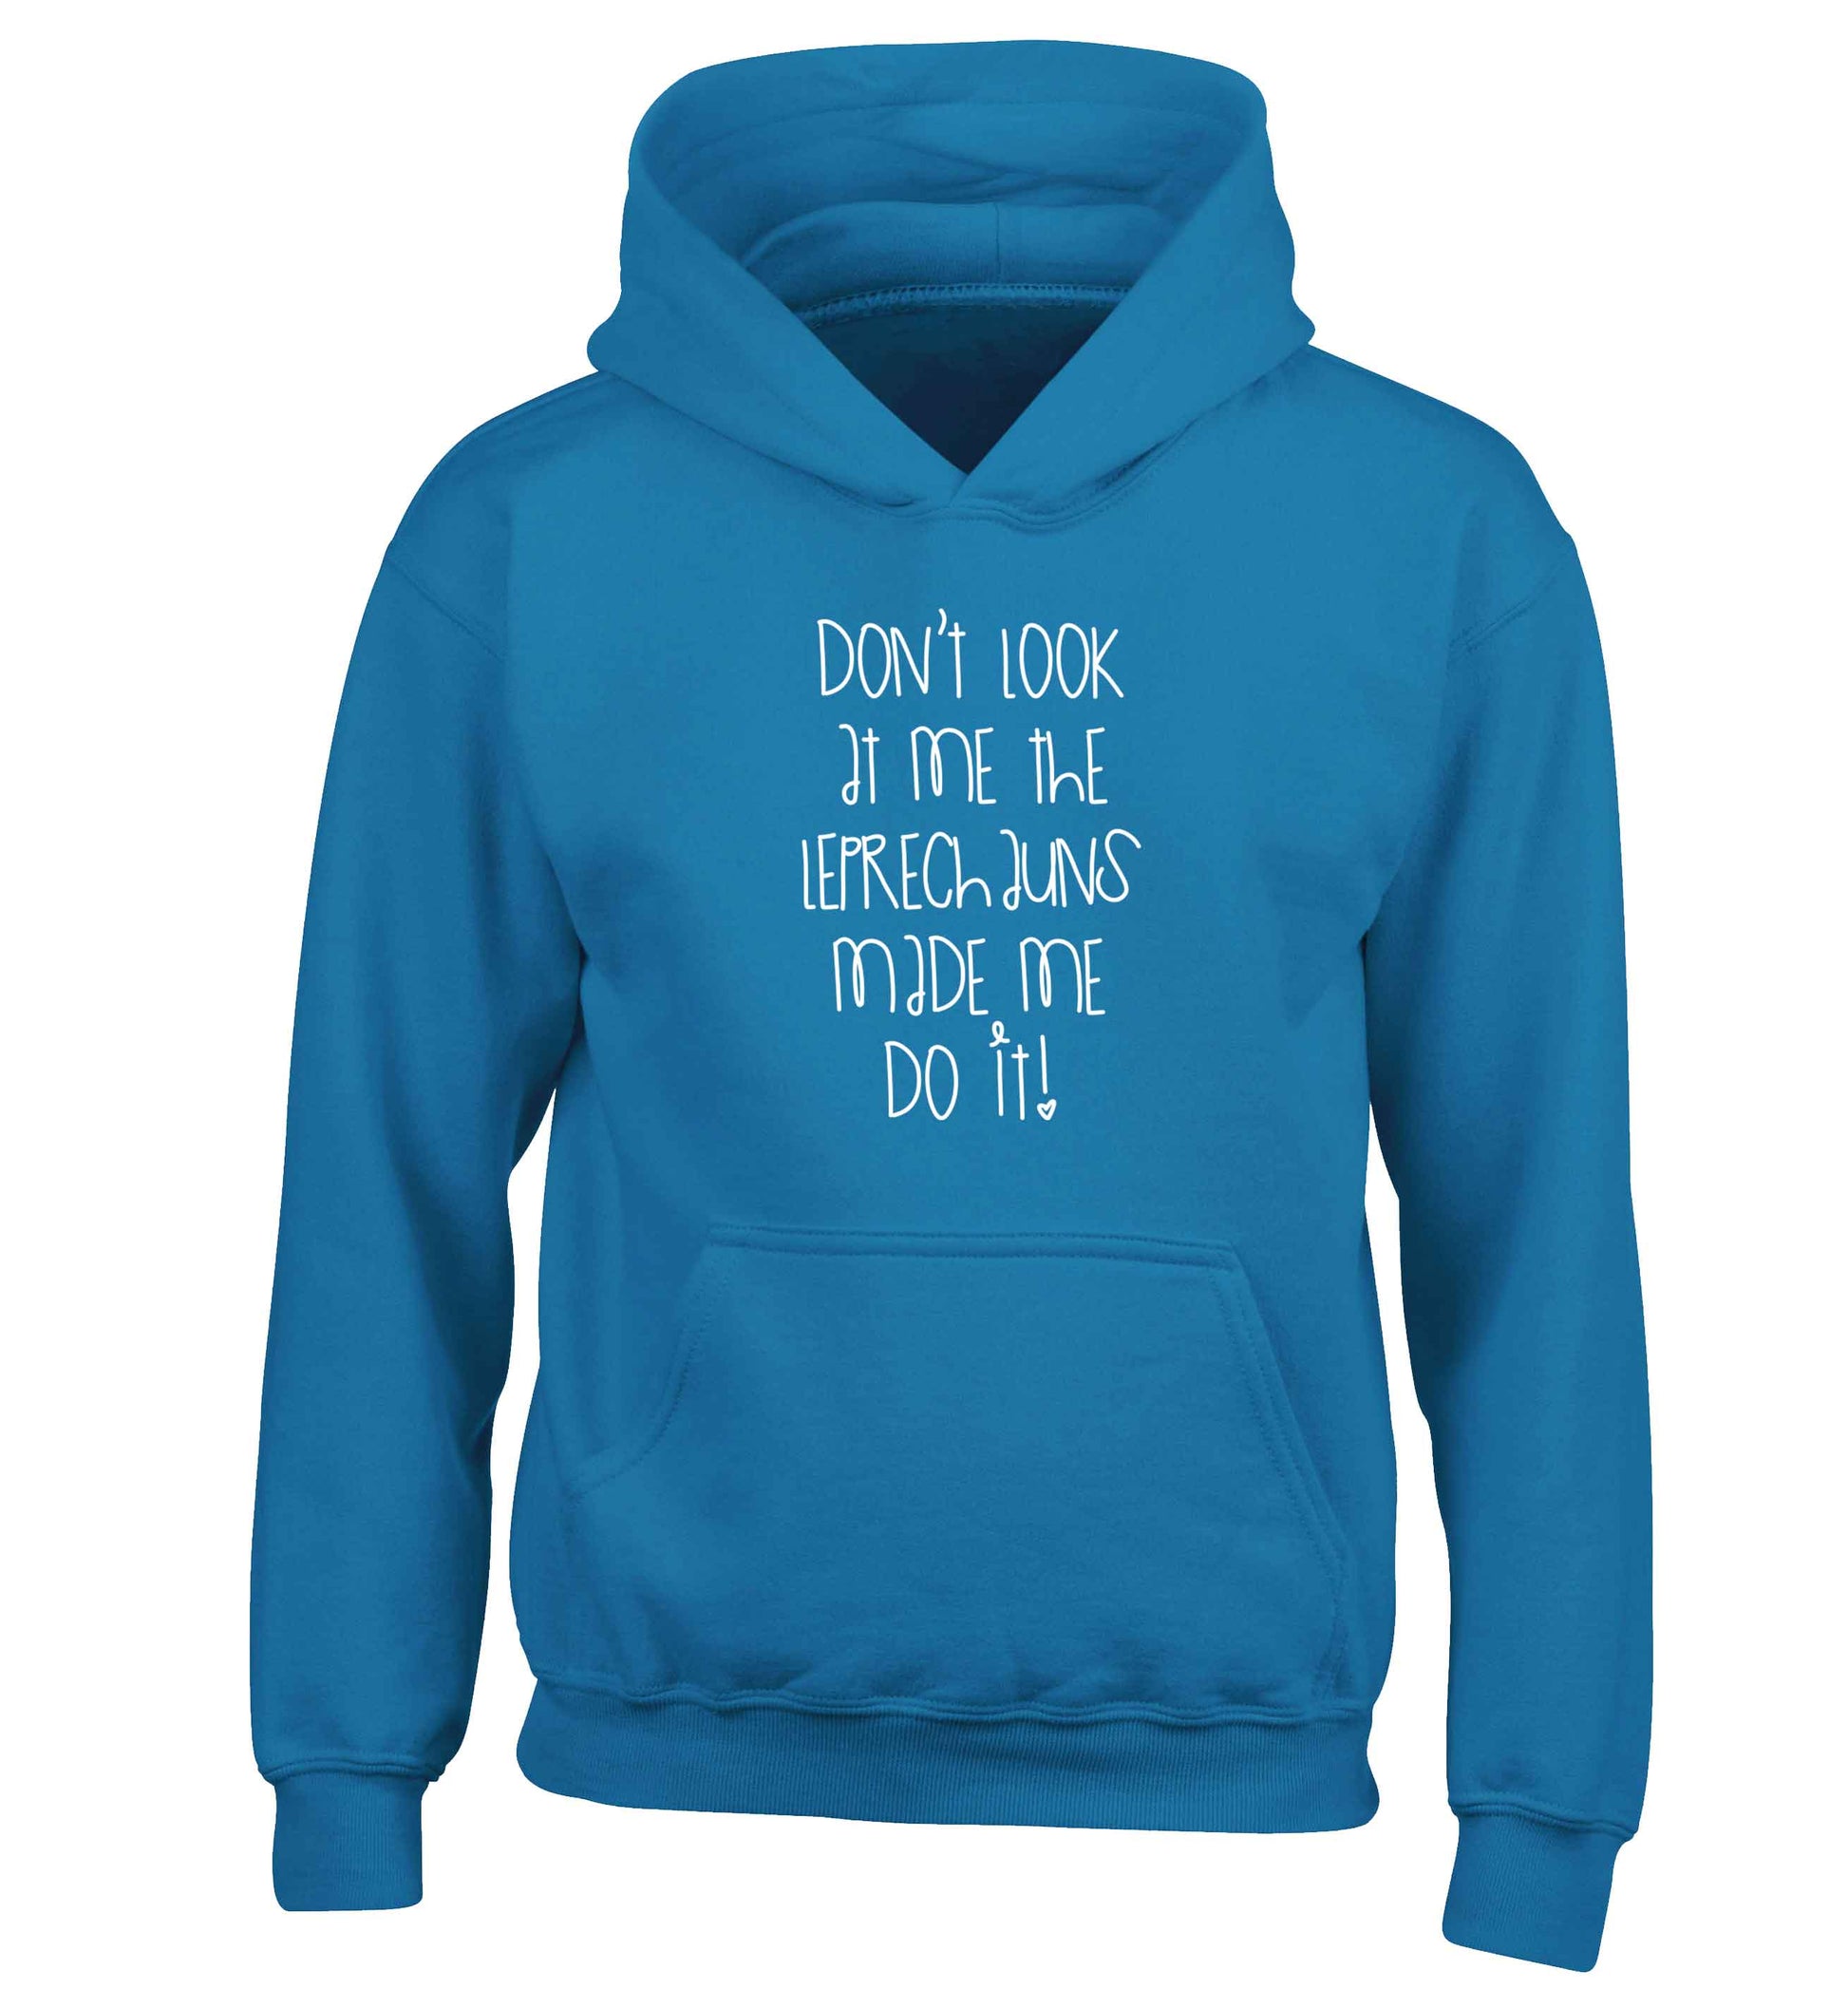 Don't look at me the leprechauns made me do it children's blue hoodie 12-13 Years